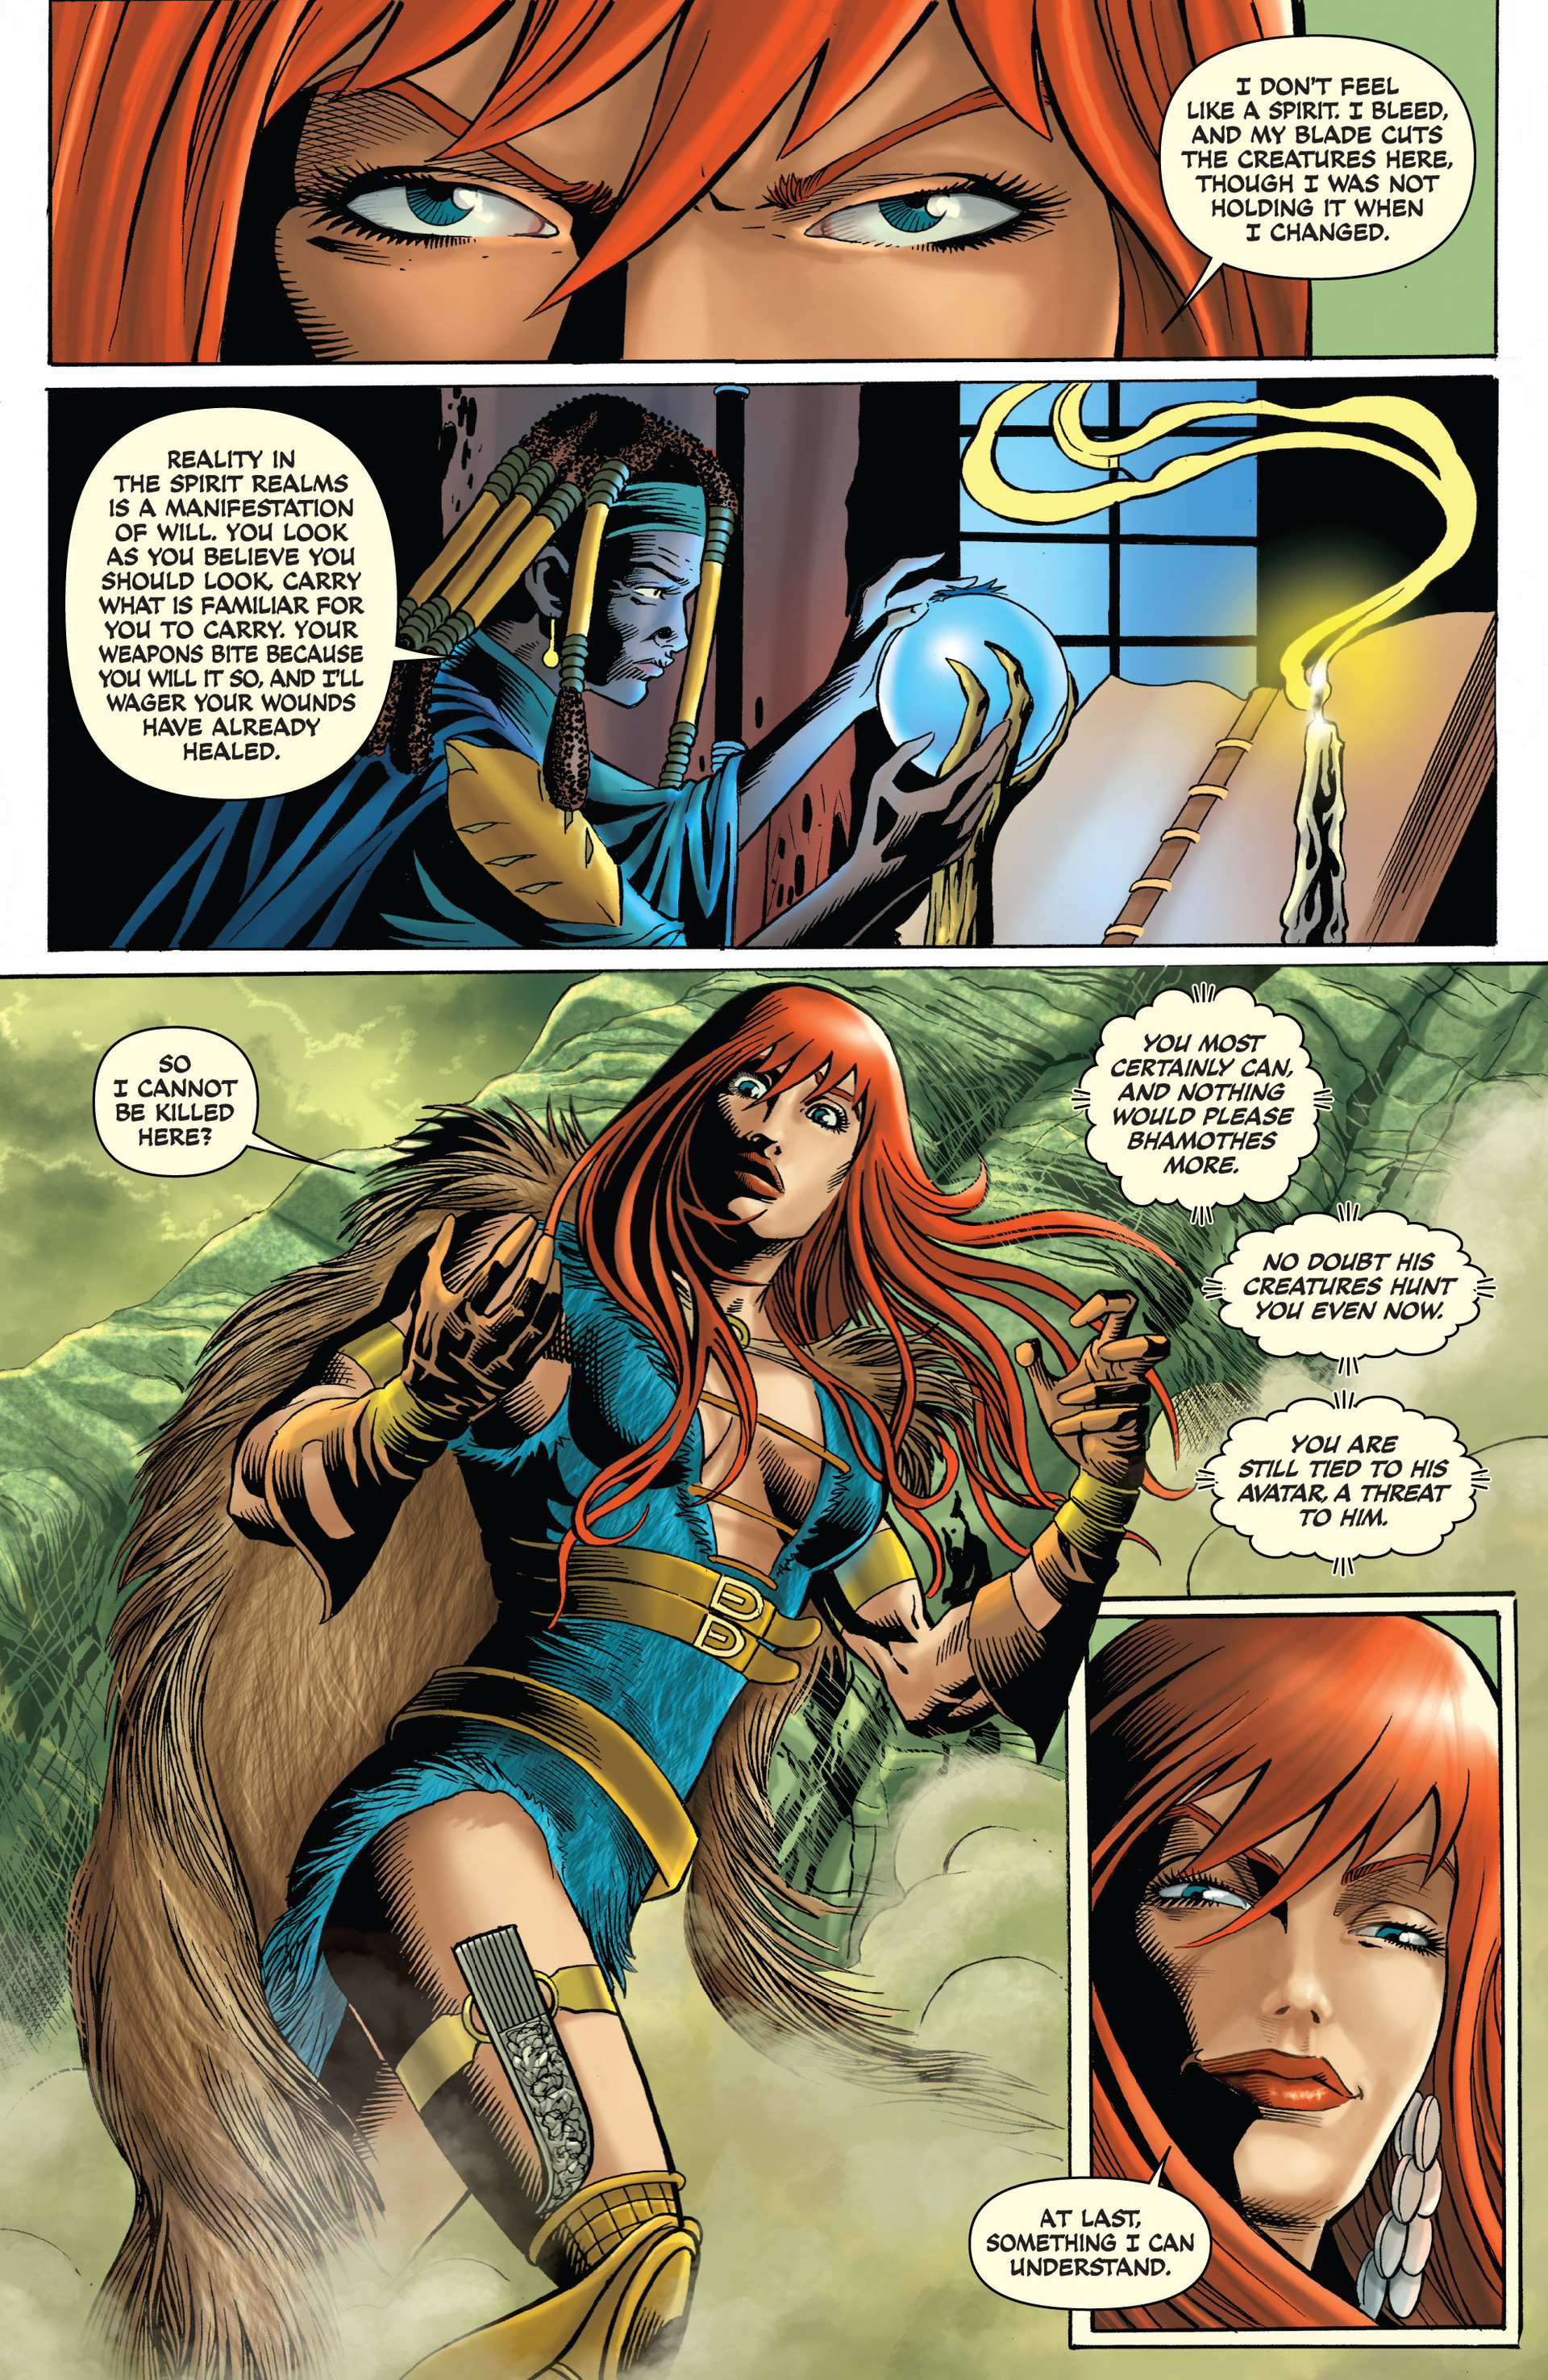 Red Sonja Unchained Issue 4 Viewcomic Reading Comics